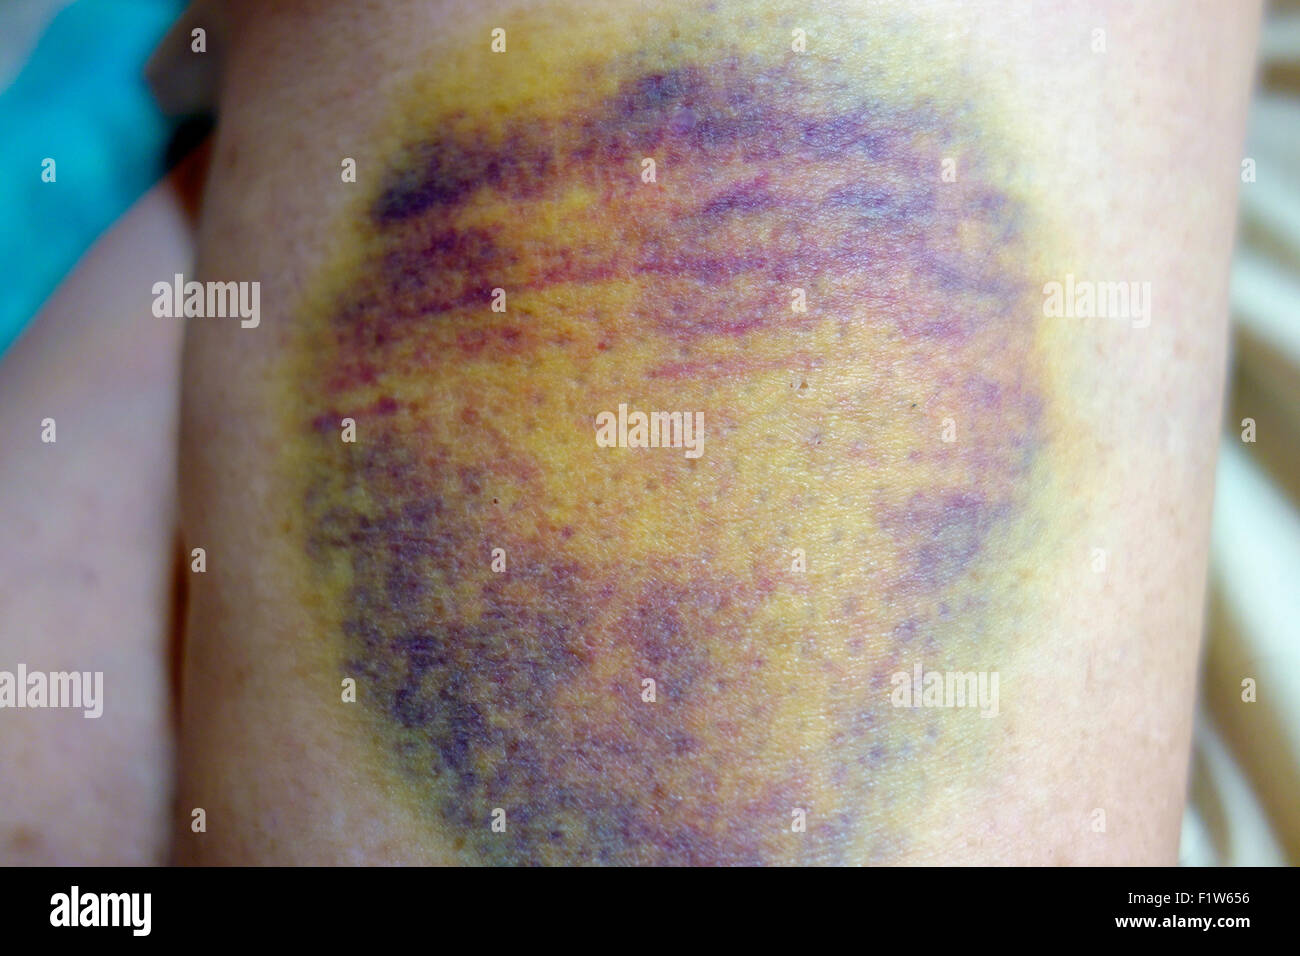 A very large bruise, contusion or hematoma on a woman's leg or thigh skin showing black, blue and yellow discoloration Stock Photo